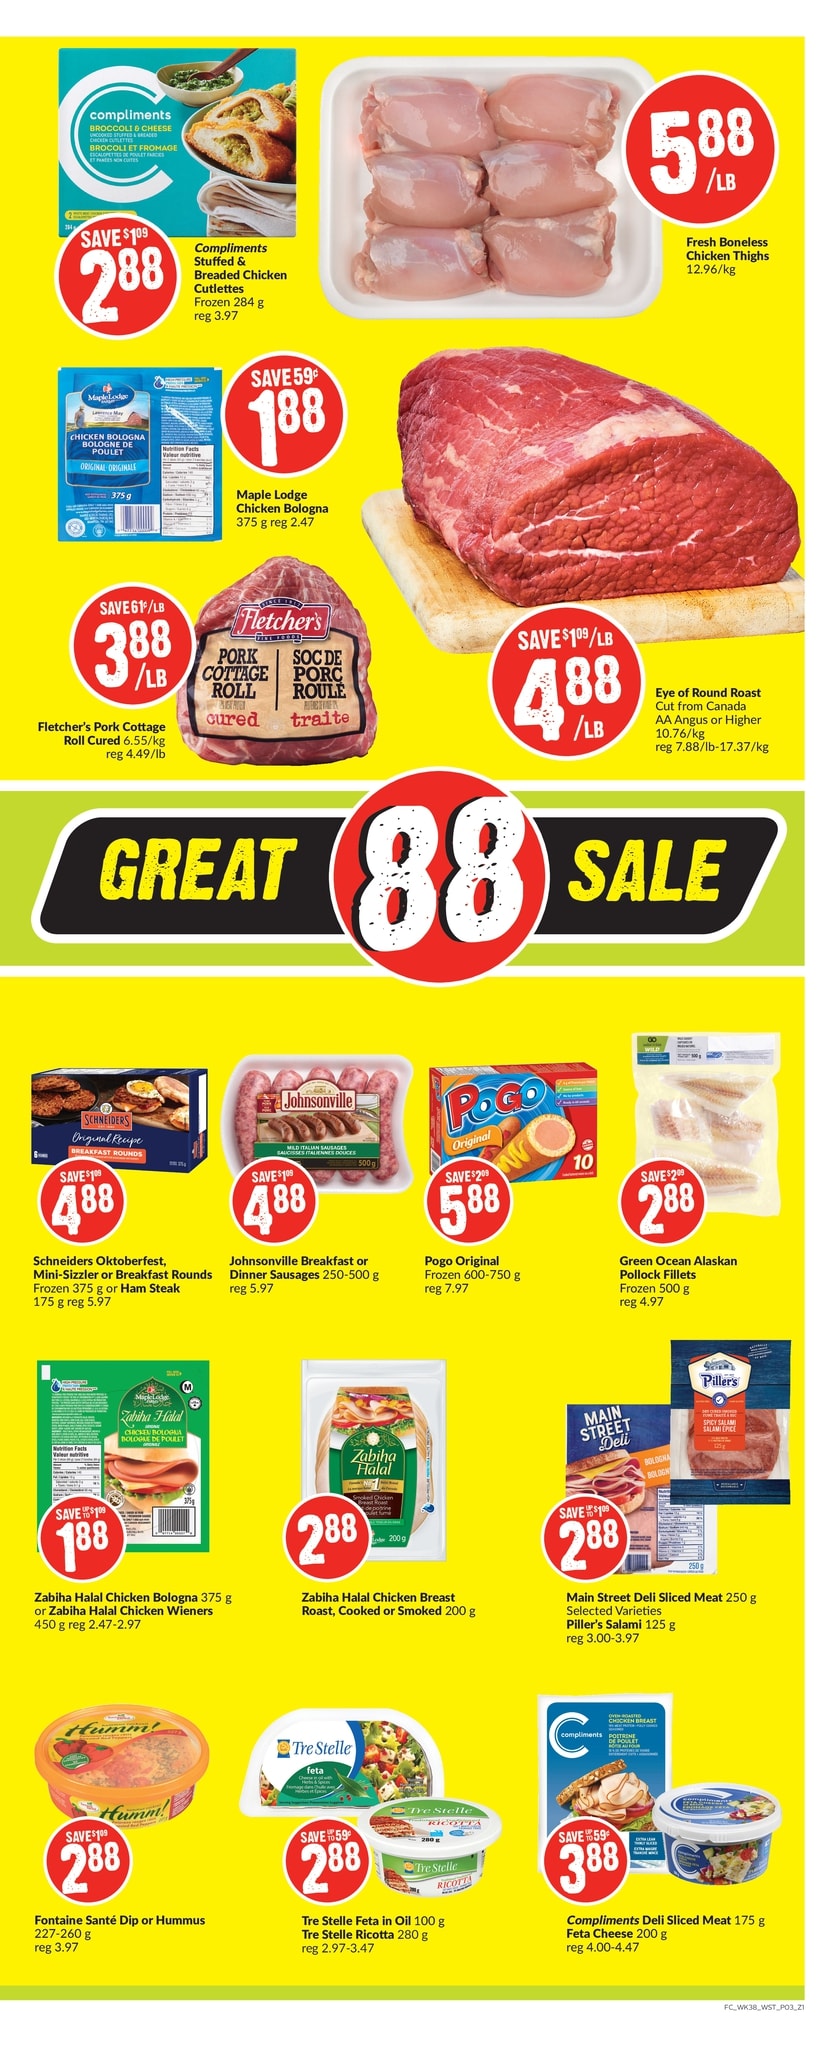 FreshCo British Columbia - Weekly Flyer Specials - Page 4